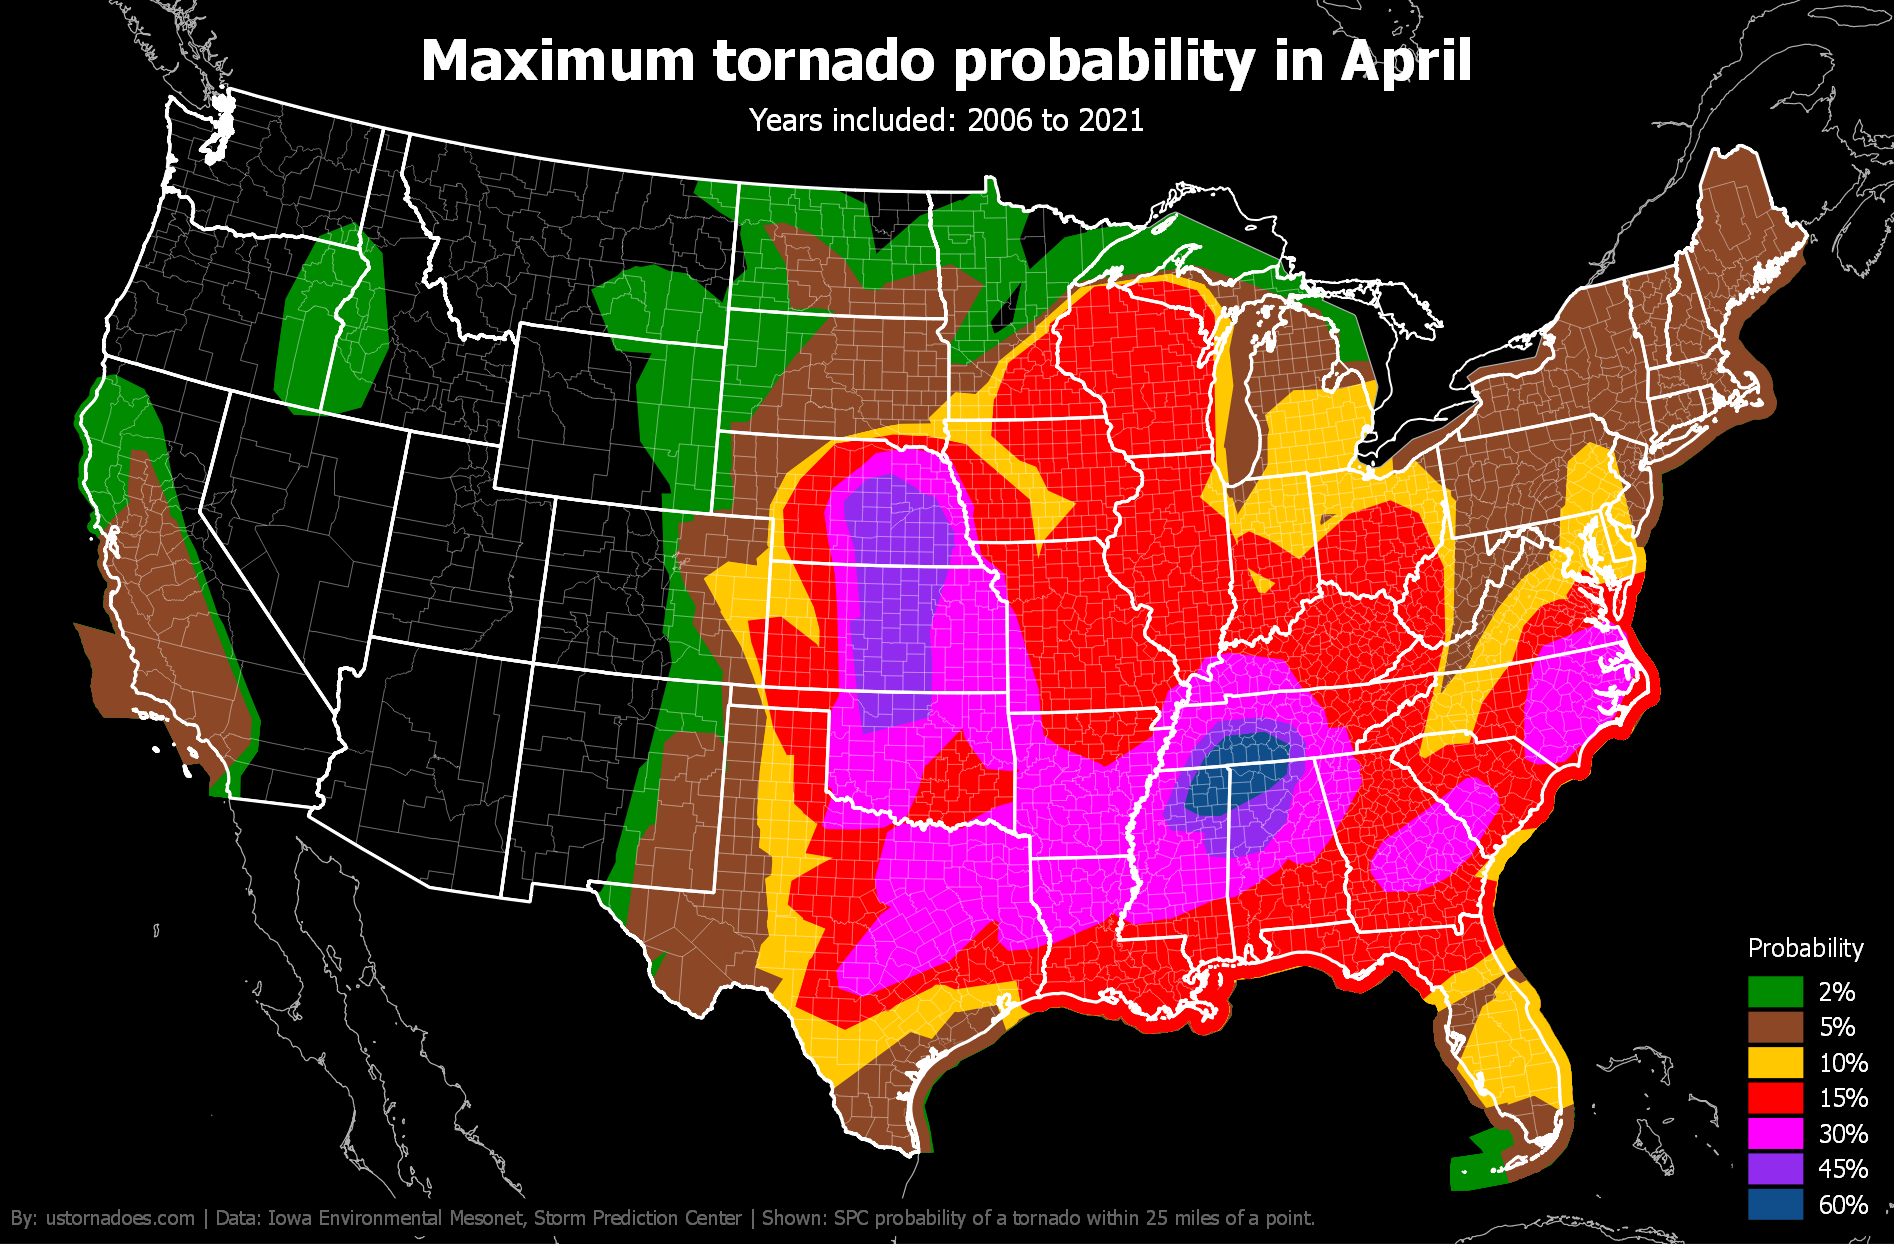 Maximum tornado probabilities by month and year